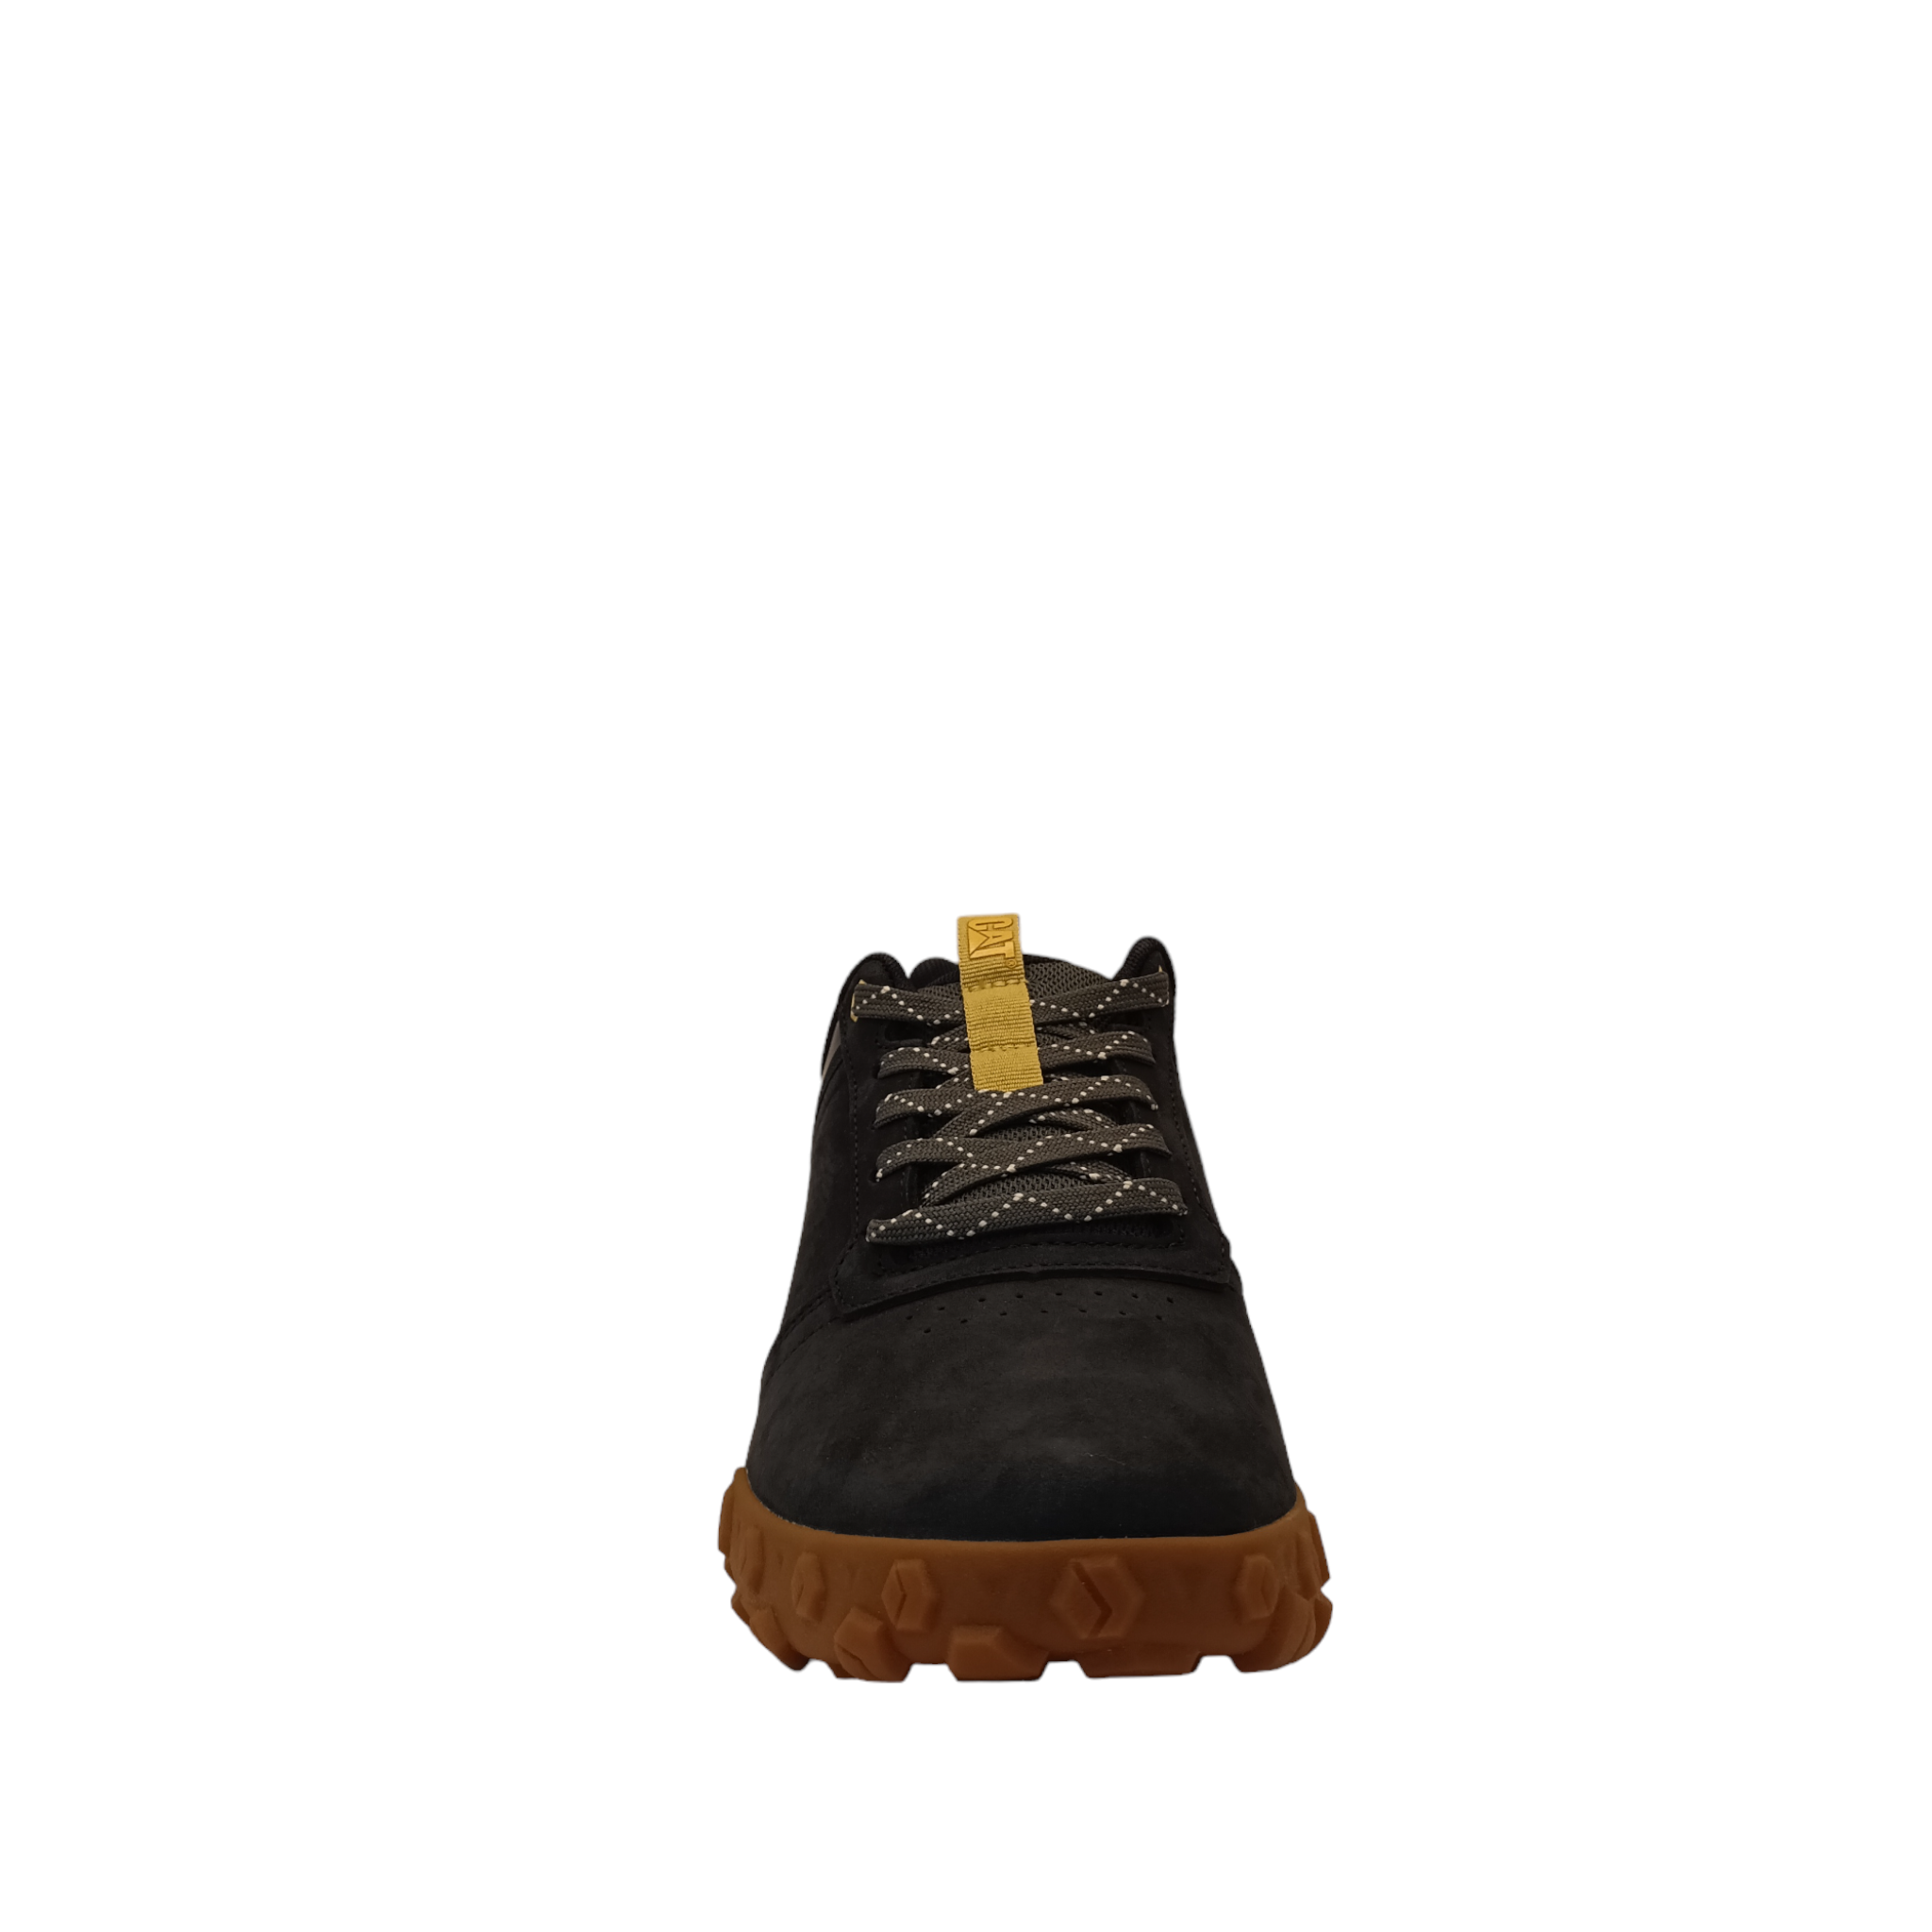 Shop Hex Cush Lo Caterpillar - with shoe&amp;me - from Caterpillar - Shoes - Mens, Sneaker, Winter - [collection]